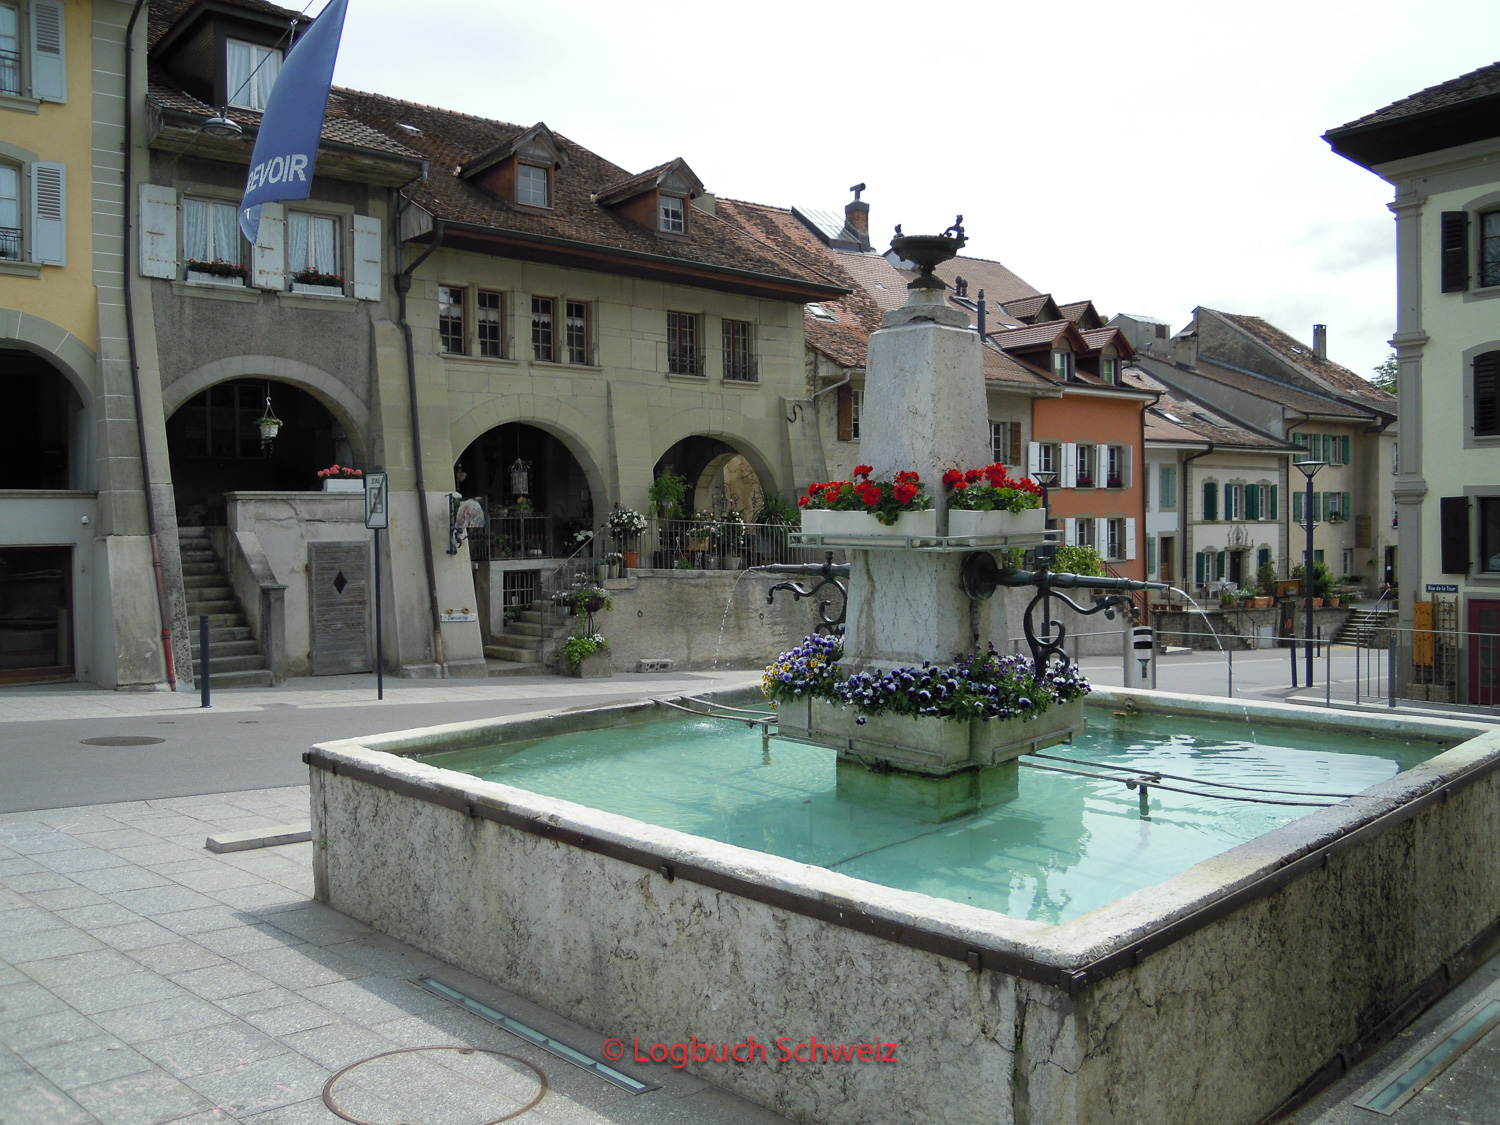 Avenches